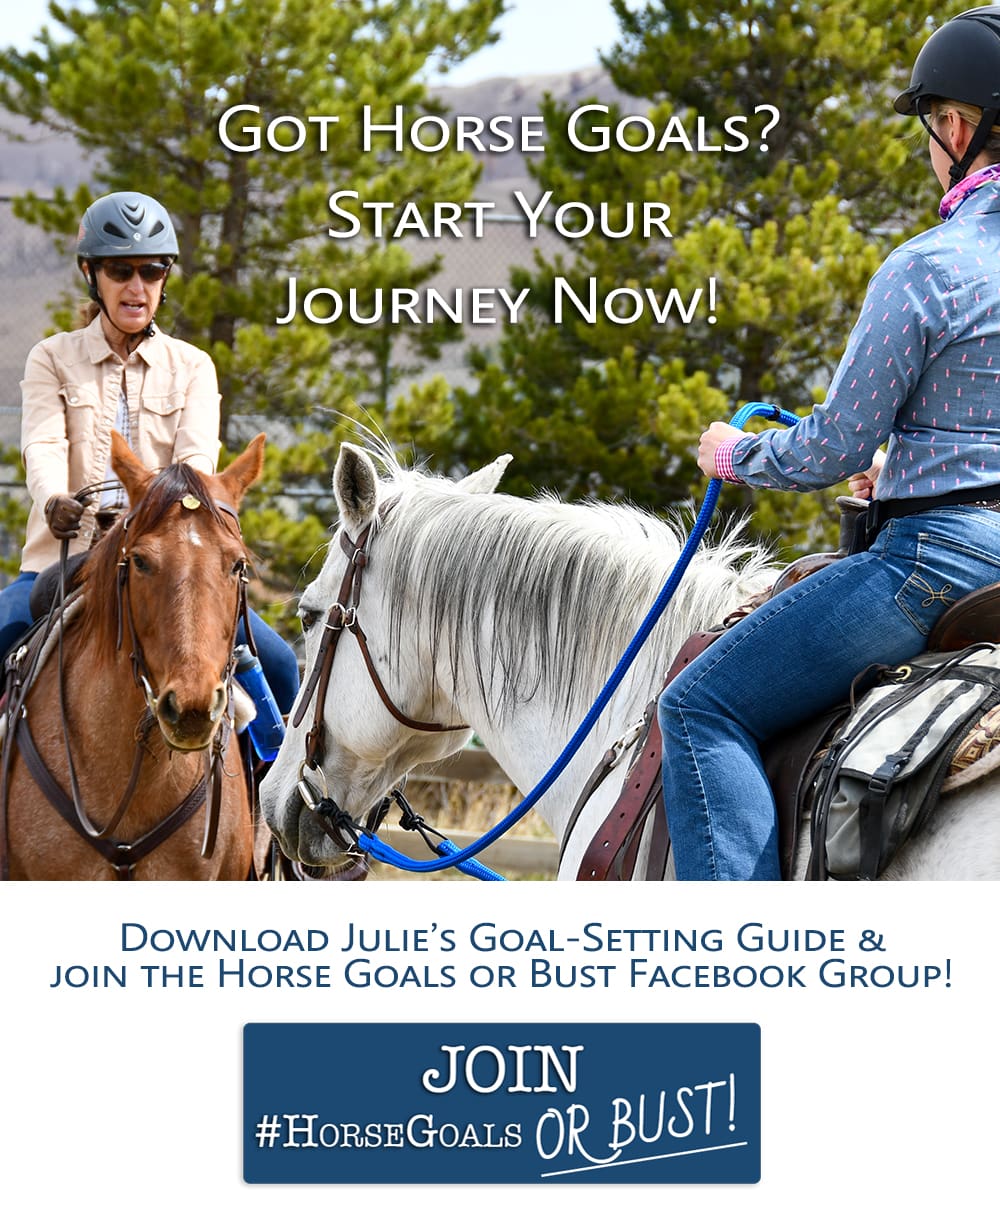 Got horse goals? Start your journey now! Download Julie's goal-setting guide and join the Horse Goals or Bust Facebook Group! Button: Join Horse Goals or Bust